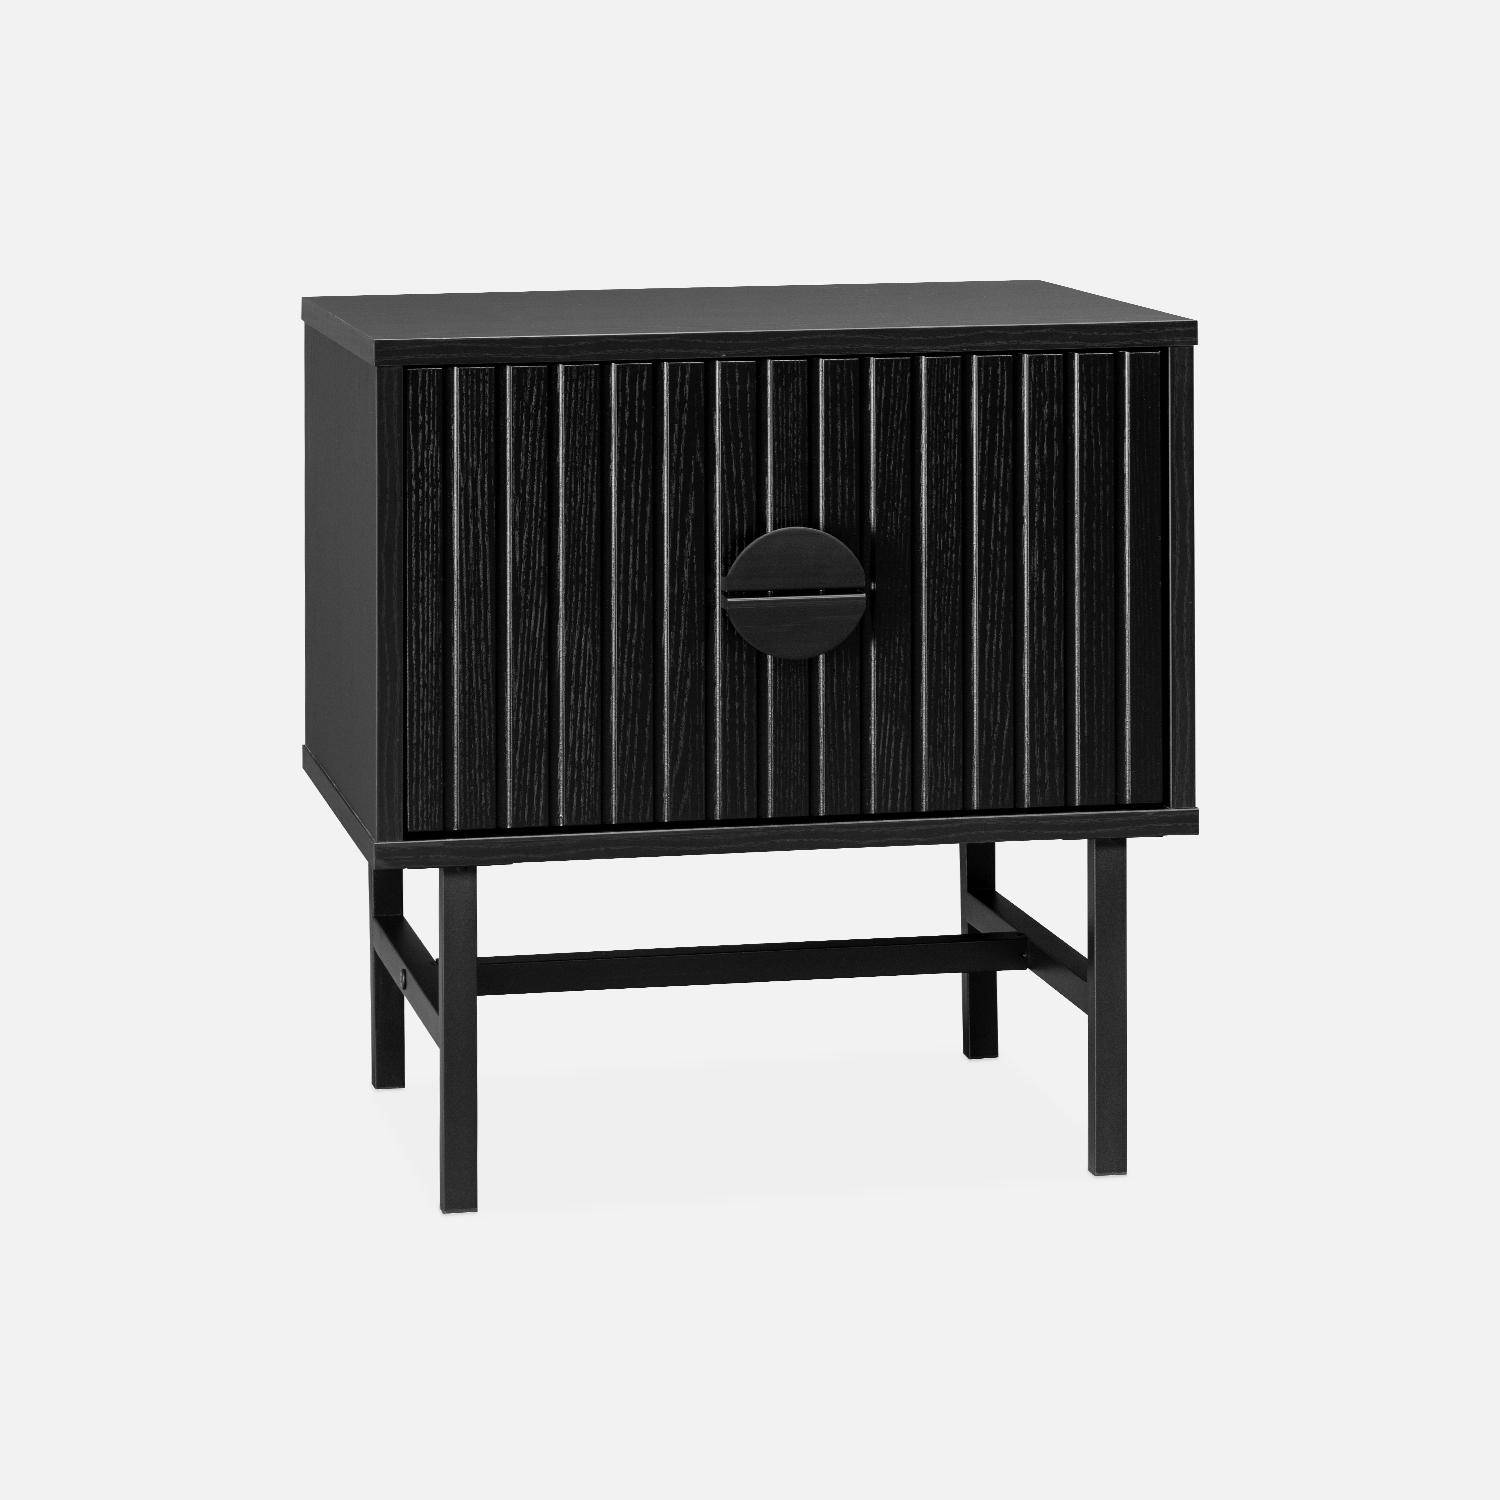 Bedside table with one drawer, ridged effect, industrial style, 48x39x50.3cm - Bazalt - Black,sweeek,Photo3